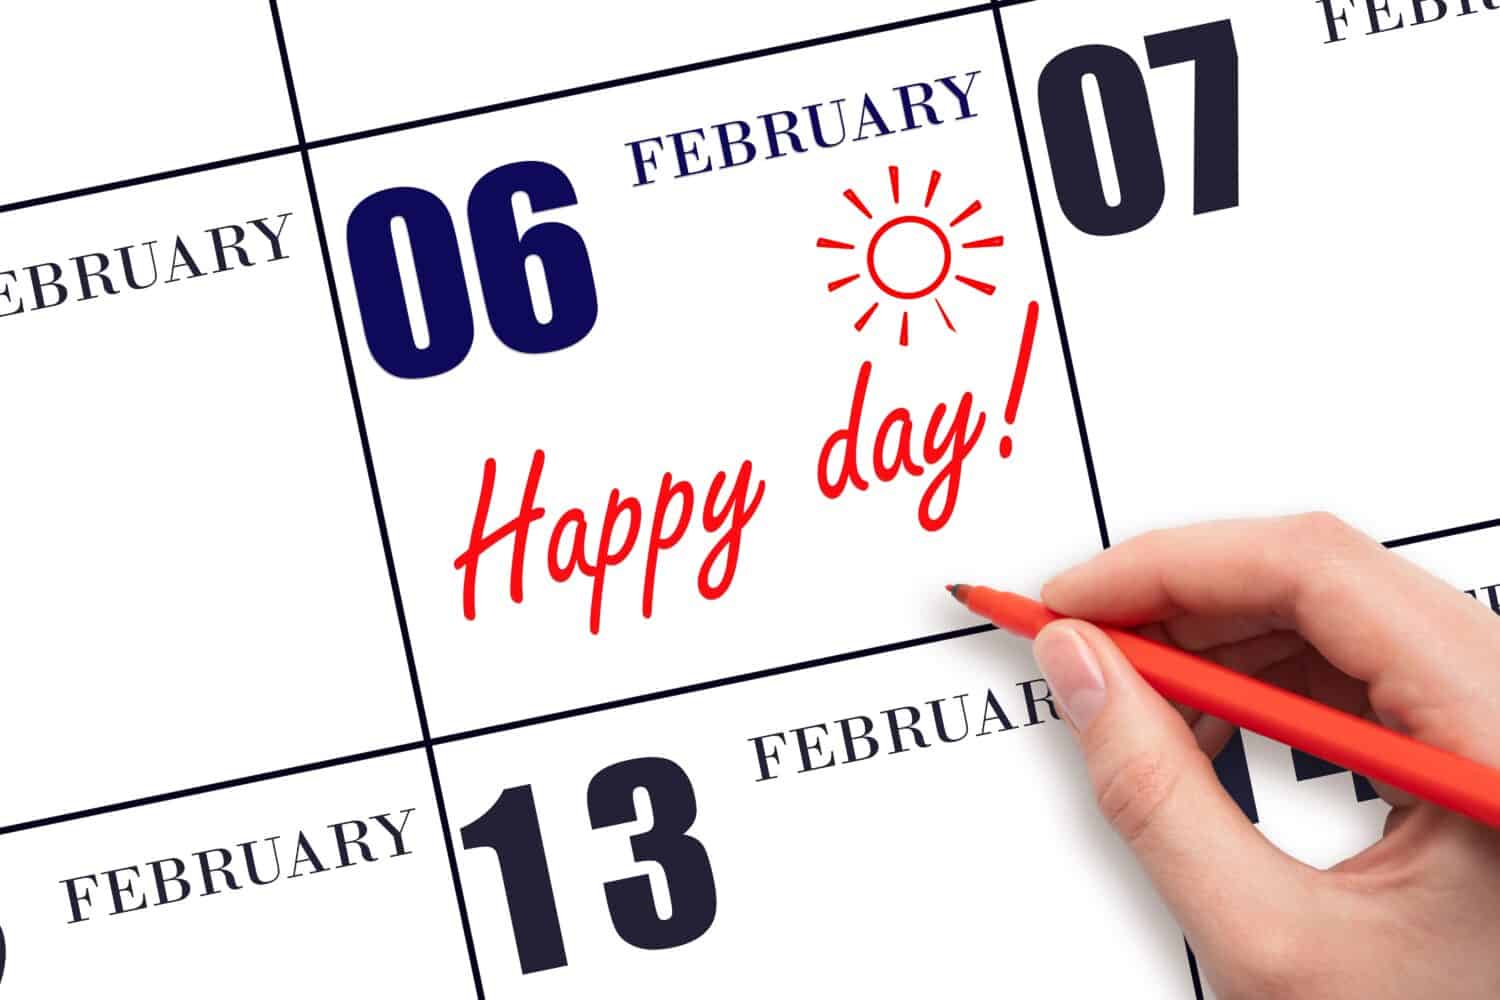 6th day of February. Hand writing the text HAPPY DAY and drawing the sun on the calendar date February 6. Save the date. Holiday. Motivation. Winter month, day of the year concept.